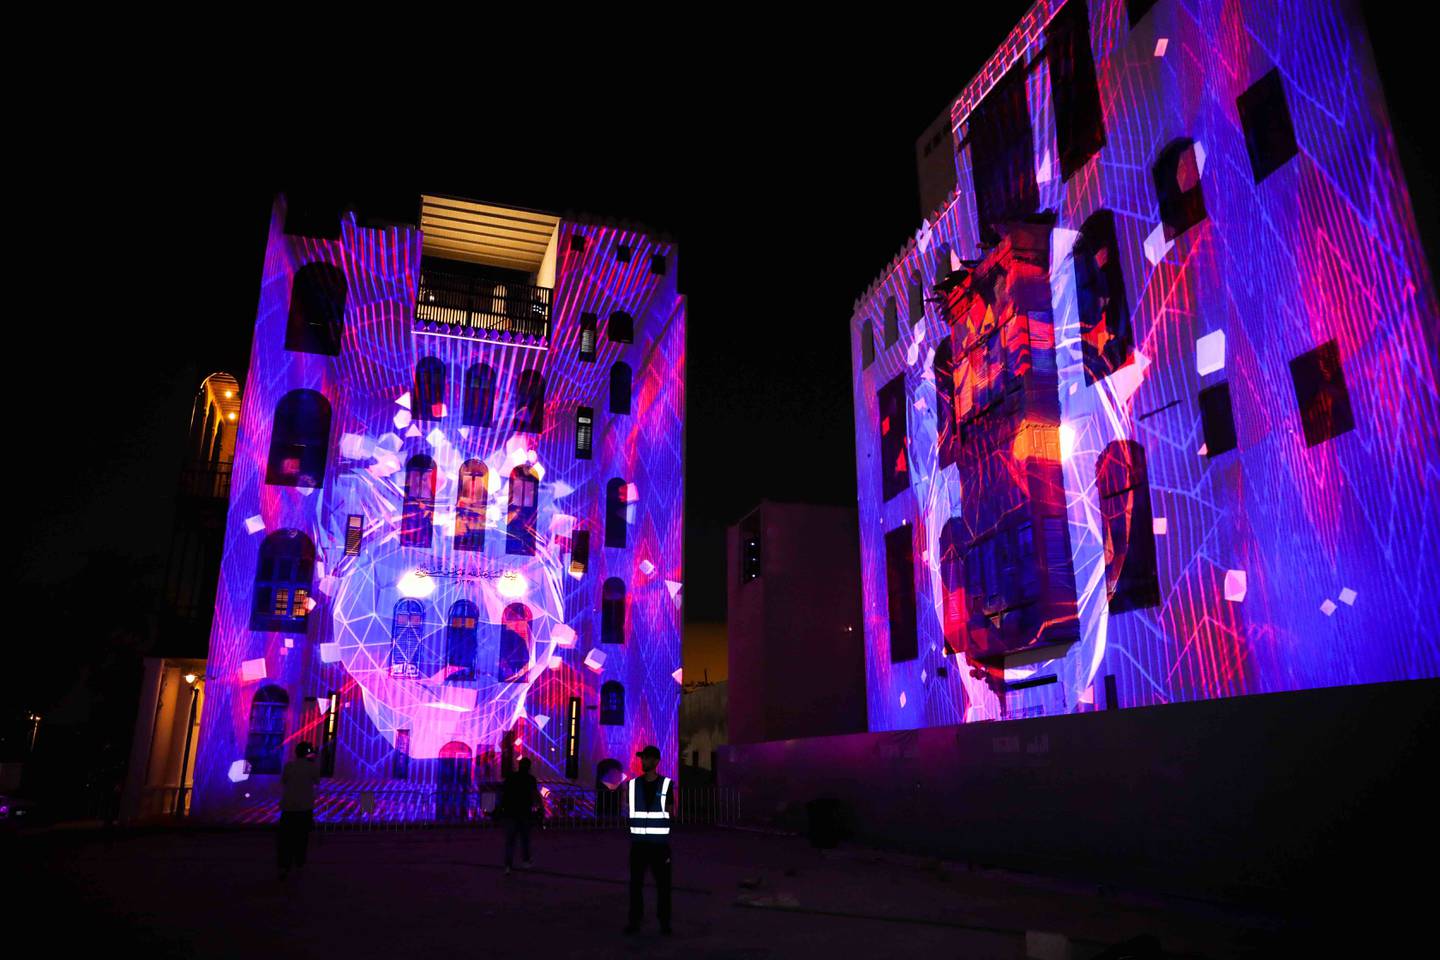 The festival will also feature a one-of-a-kind light show projected on the walls of the old town's historic buildings and surroundings. Photo: MDLBEAST